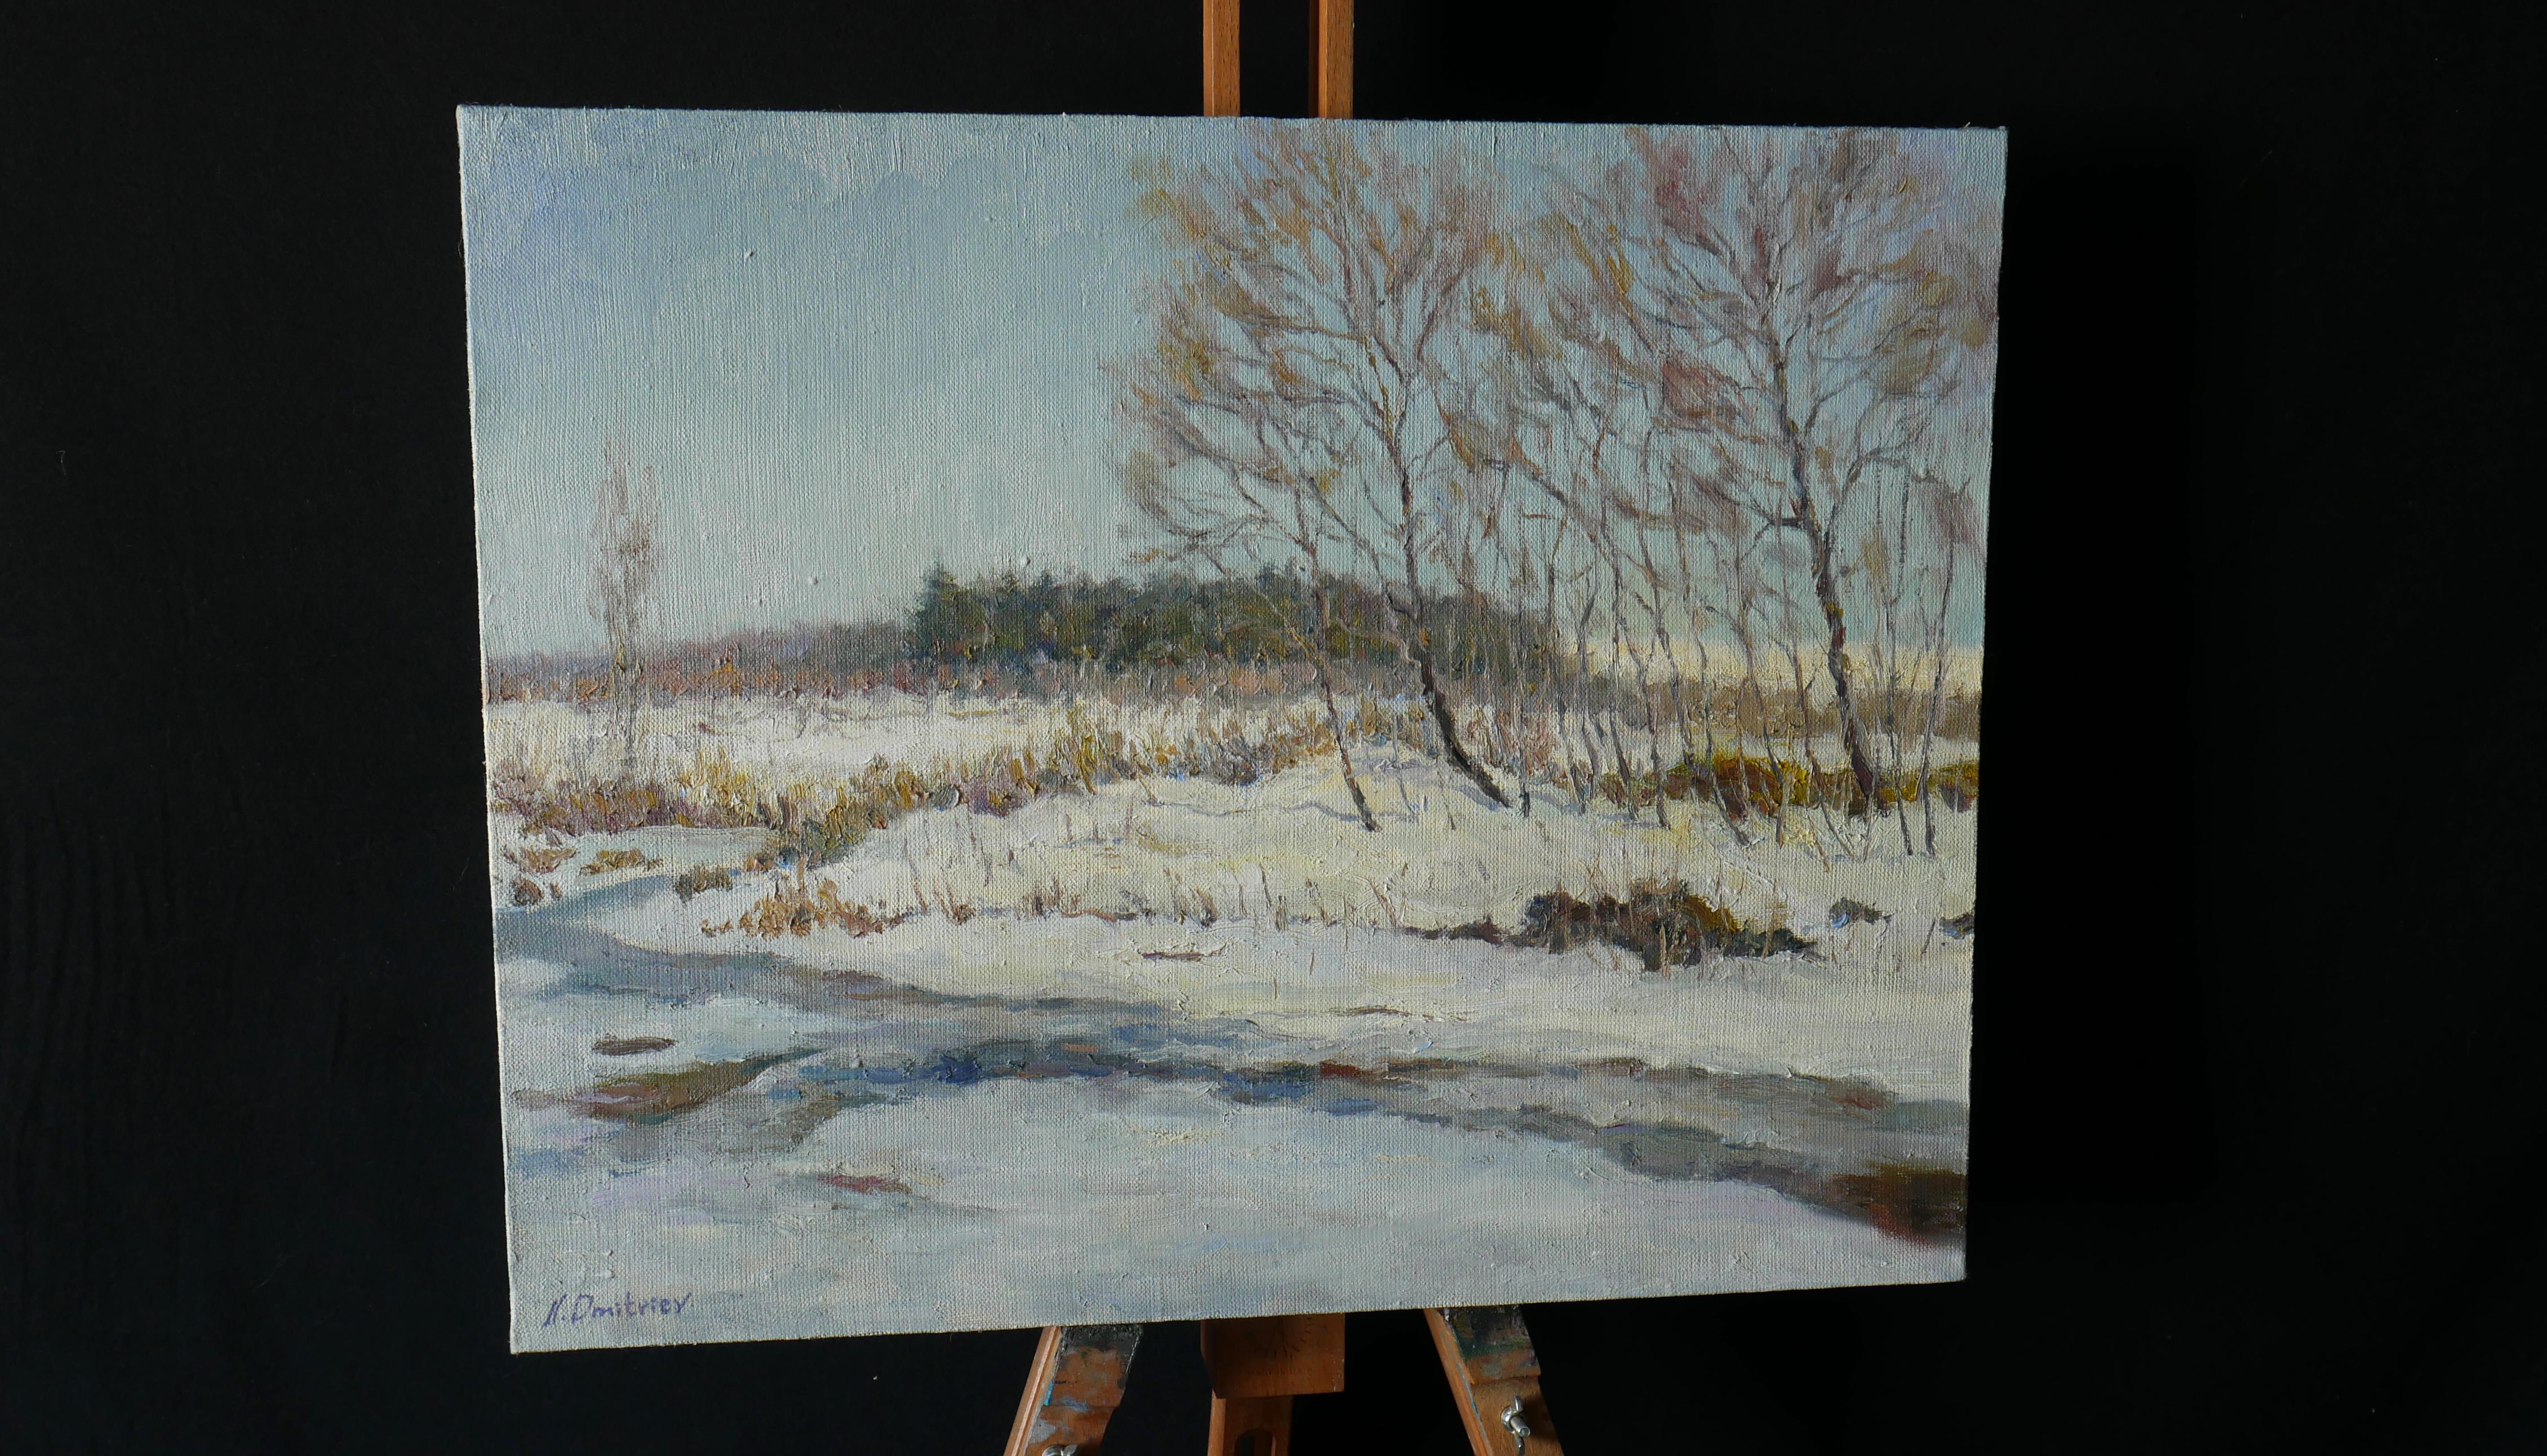 The Sunny Winter Days - original landscape painting - Impressionist Painting by Nikolay Dmitriev